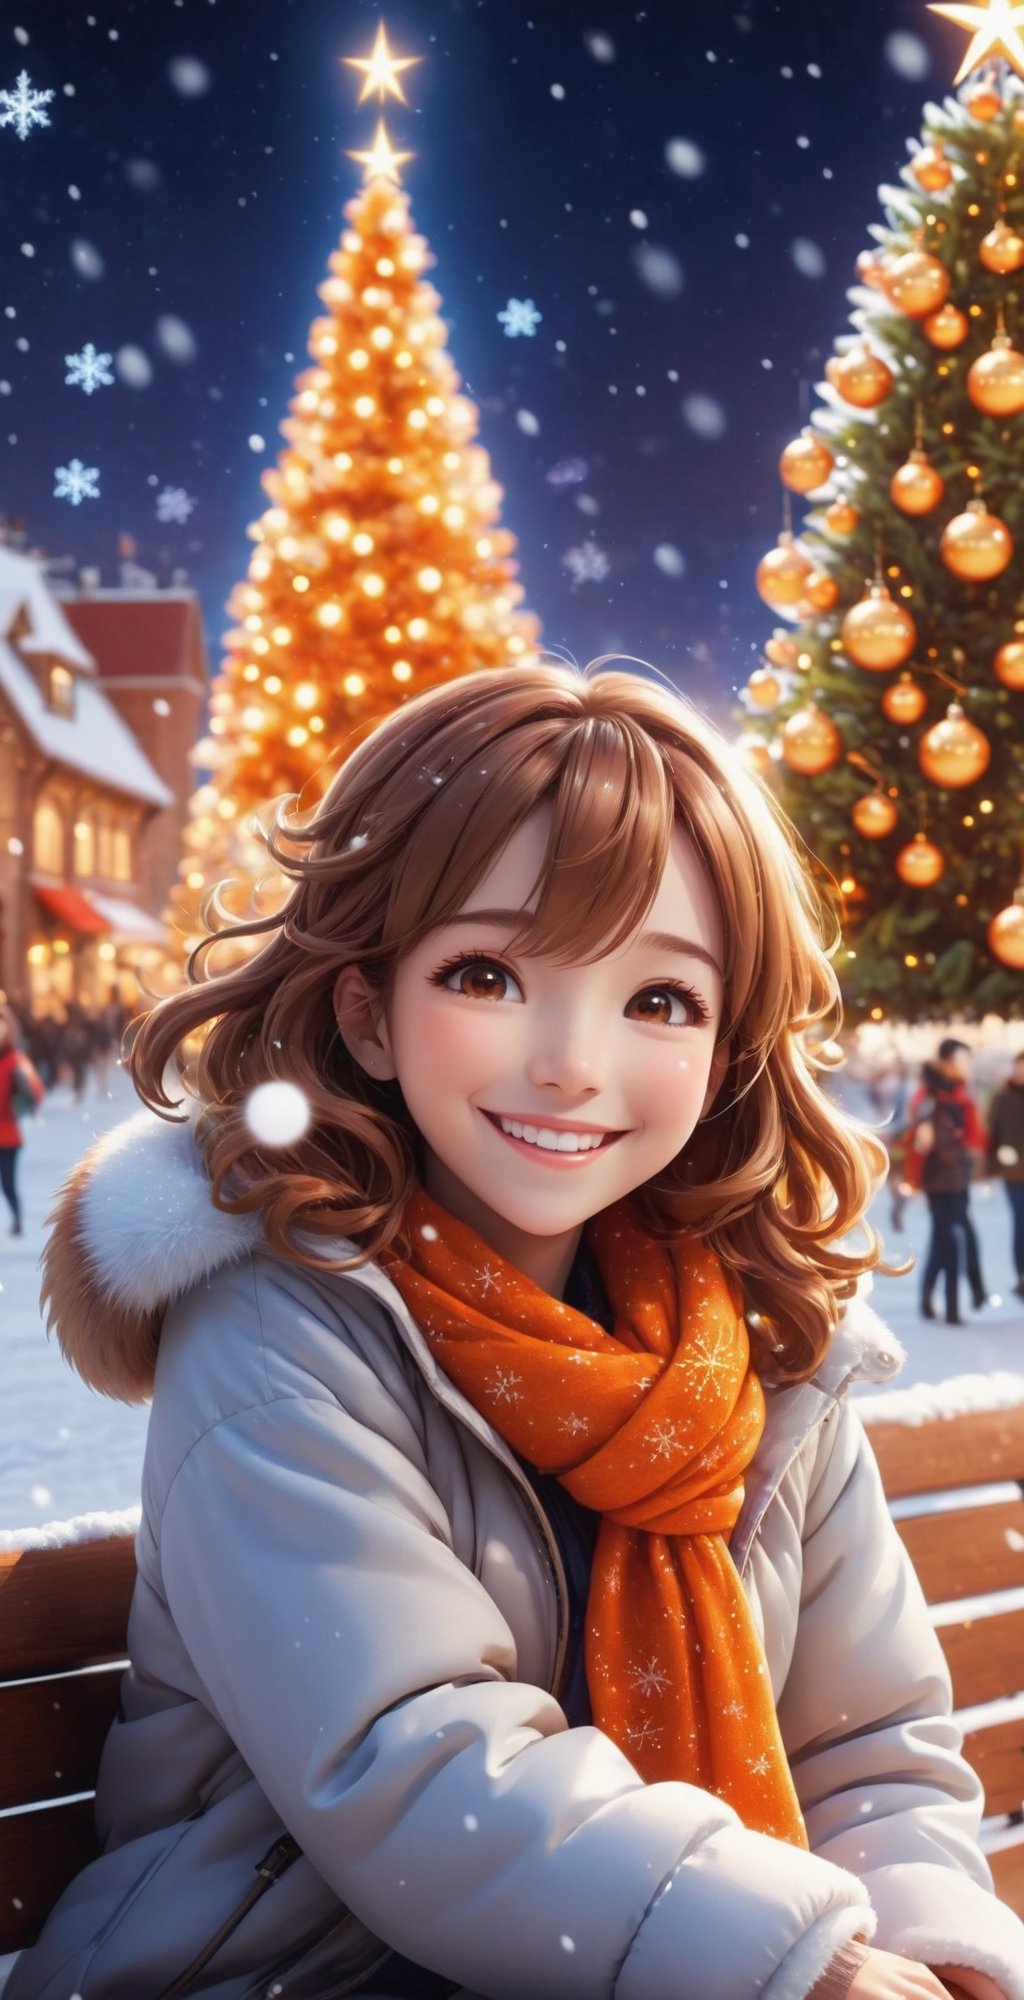 ("MERRY CHRISTMAS" text logo), A happily smiling woman (beautiful face), (Christmas Party: 1.5), brown and orange tones, Christmas, grains of light, clock tower, glowing illuminations, illuminated scenery, silver world, snow, glowing snowflakes, Christmas neon lights, cute girl curled up to warm her hands, warm light, brick cityscape, bench, Christmas tree, short hair, happiness, joyful smiles. Epic, Celestial, decoration, fantasy world, cute world.Anime 